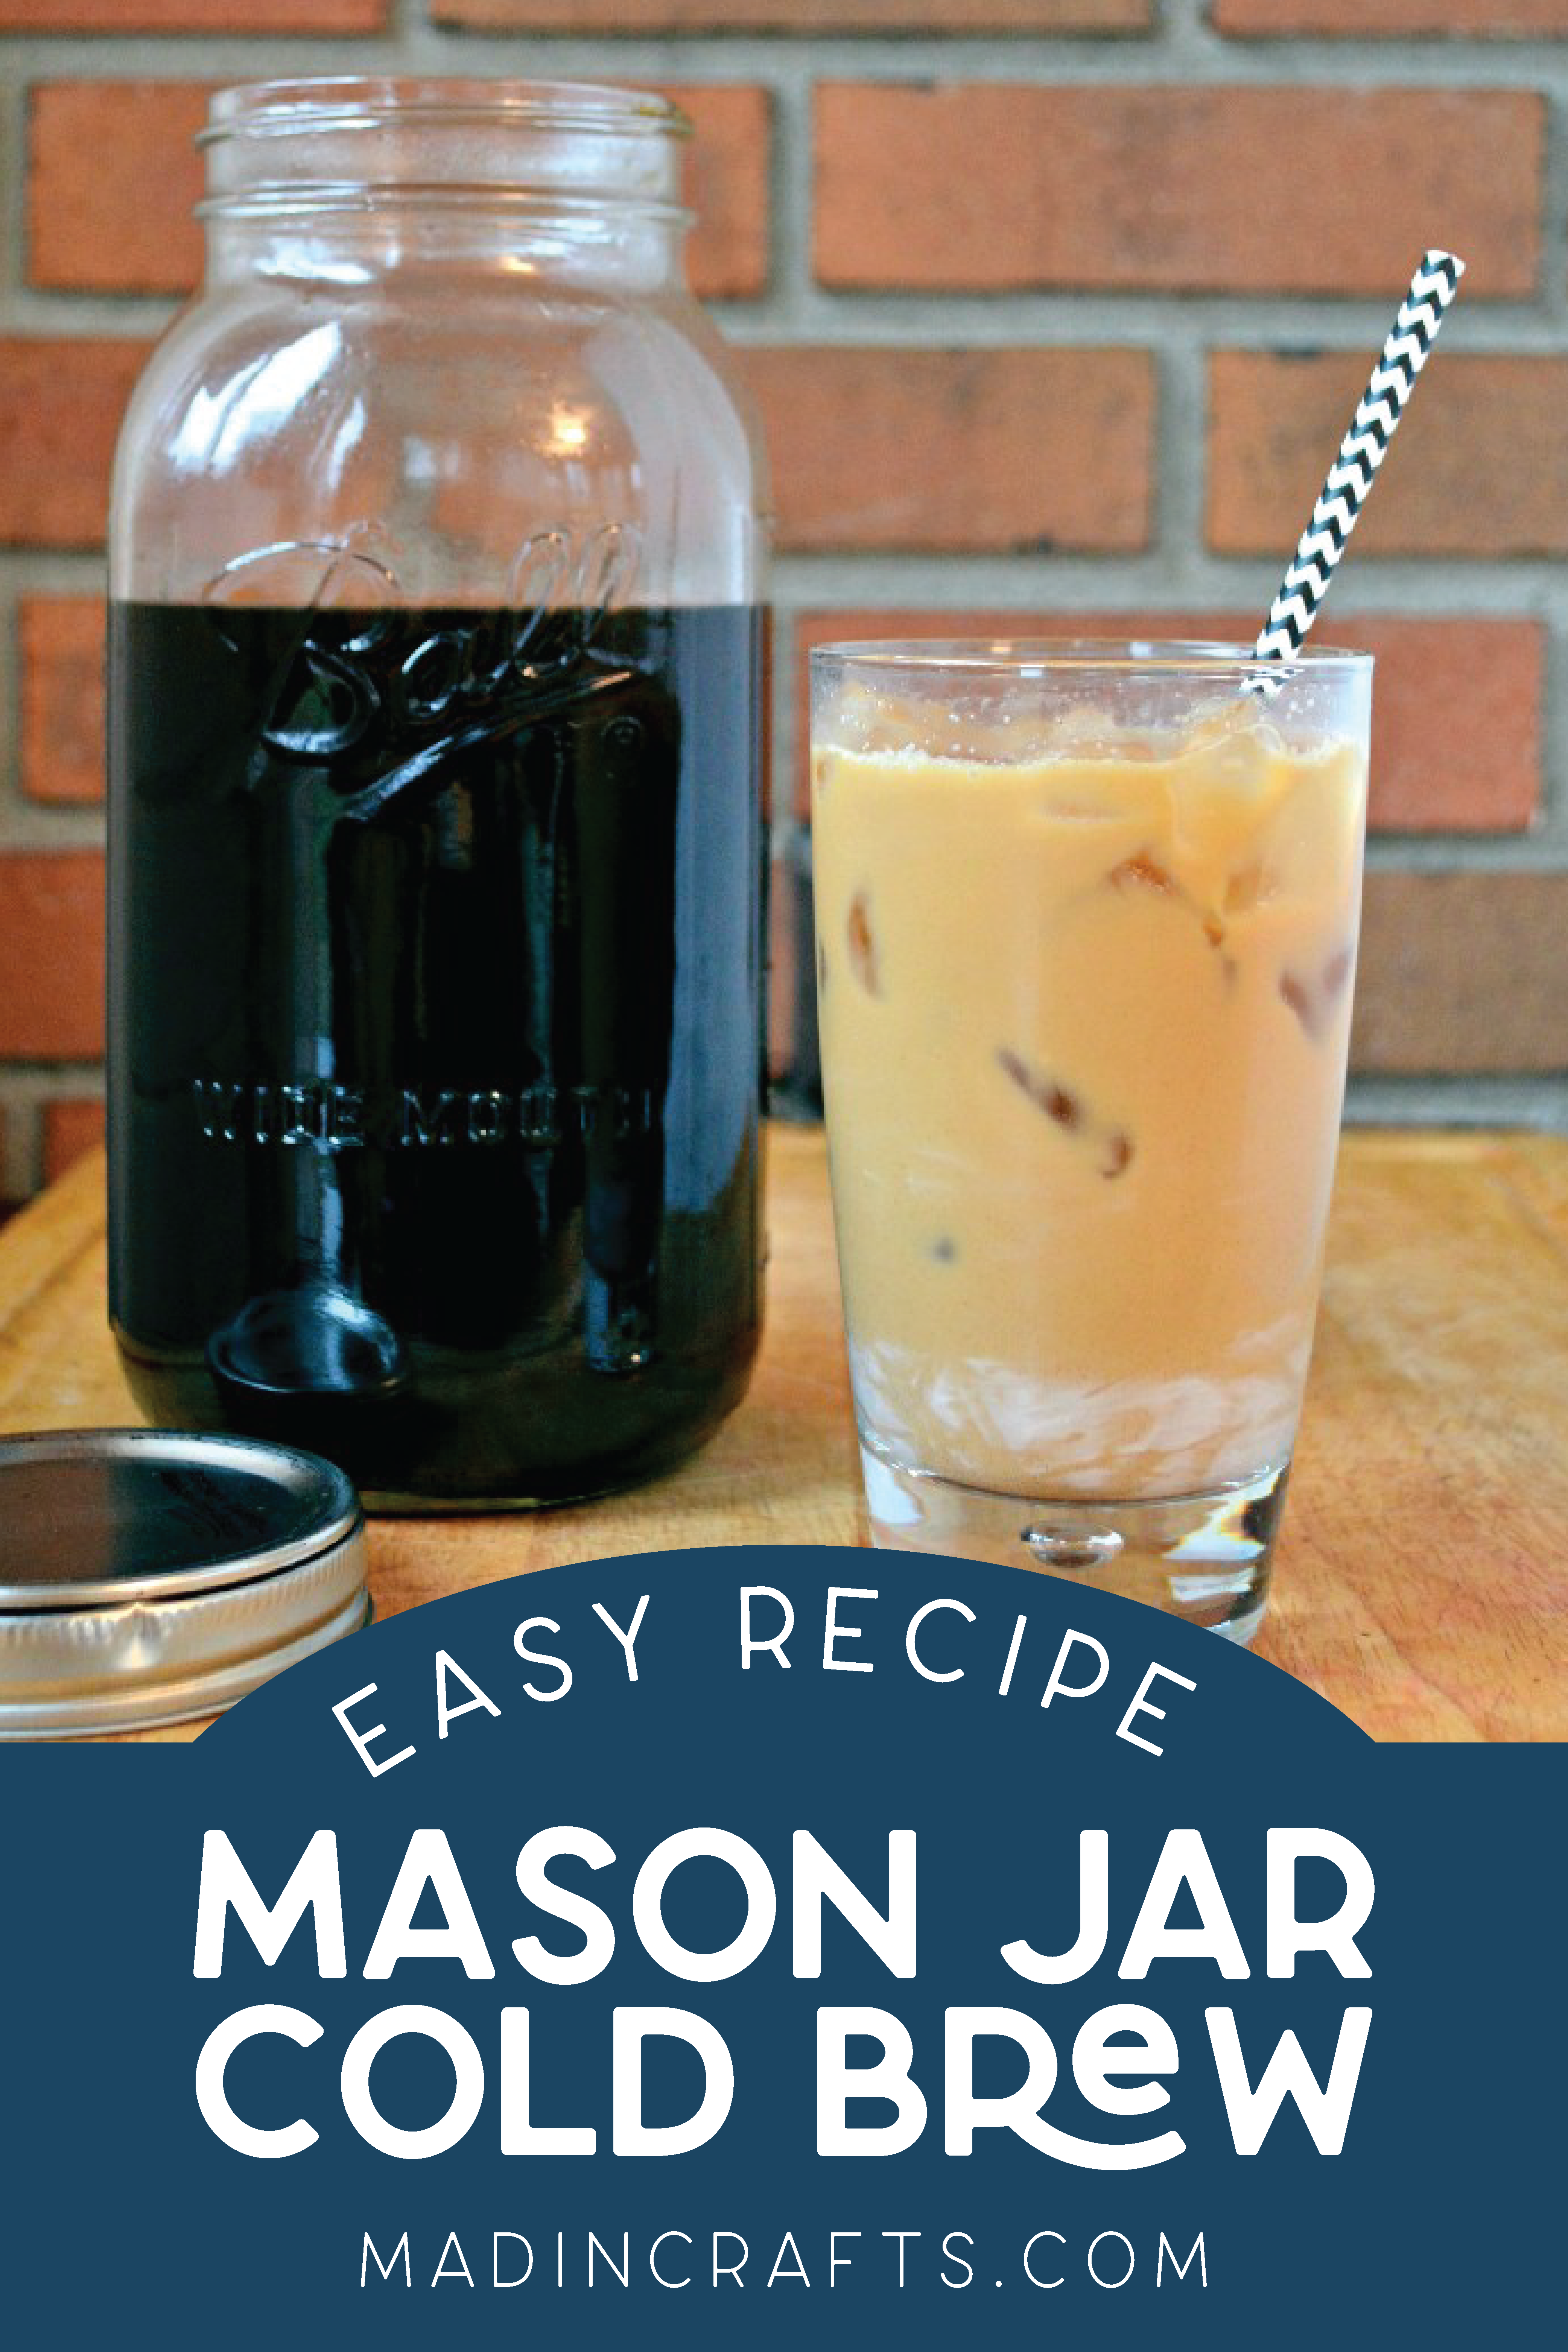 Glass of cold brew coffee next to a mason jar full of cold brew